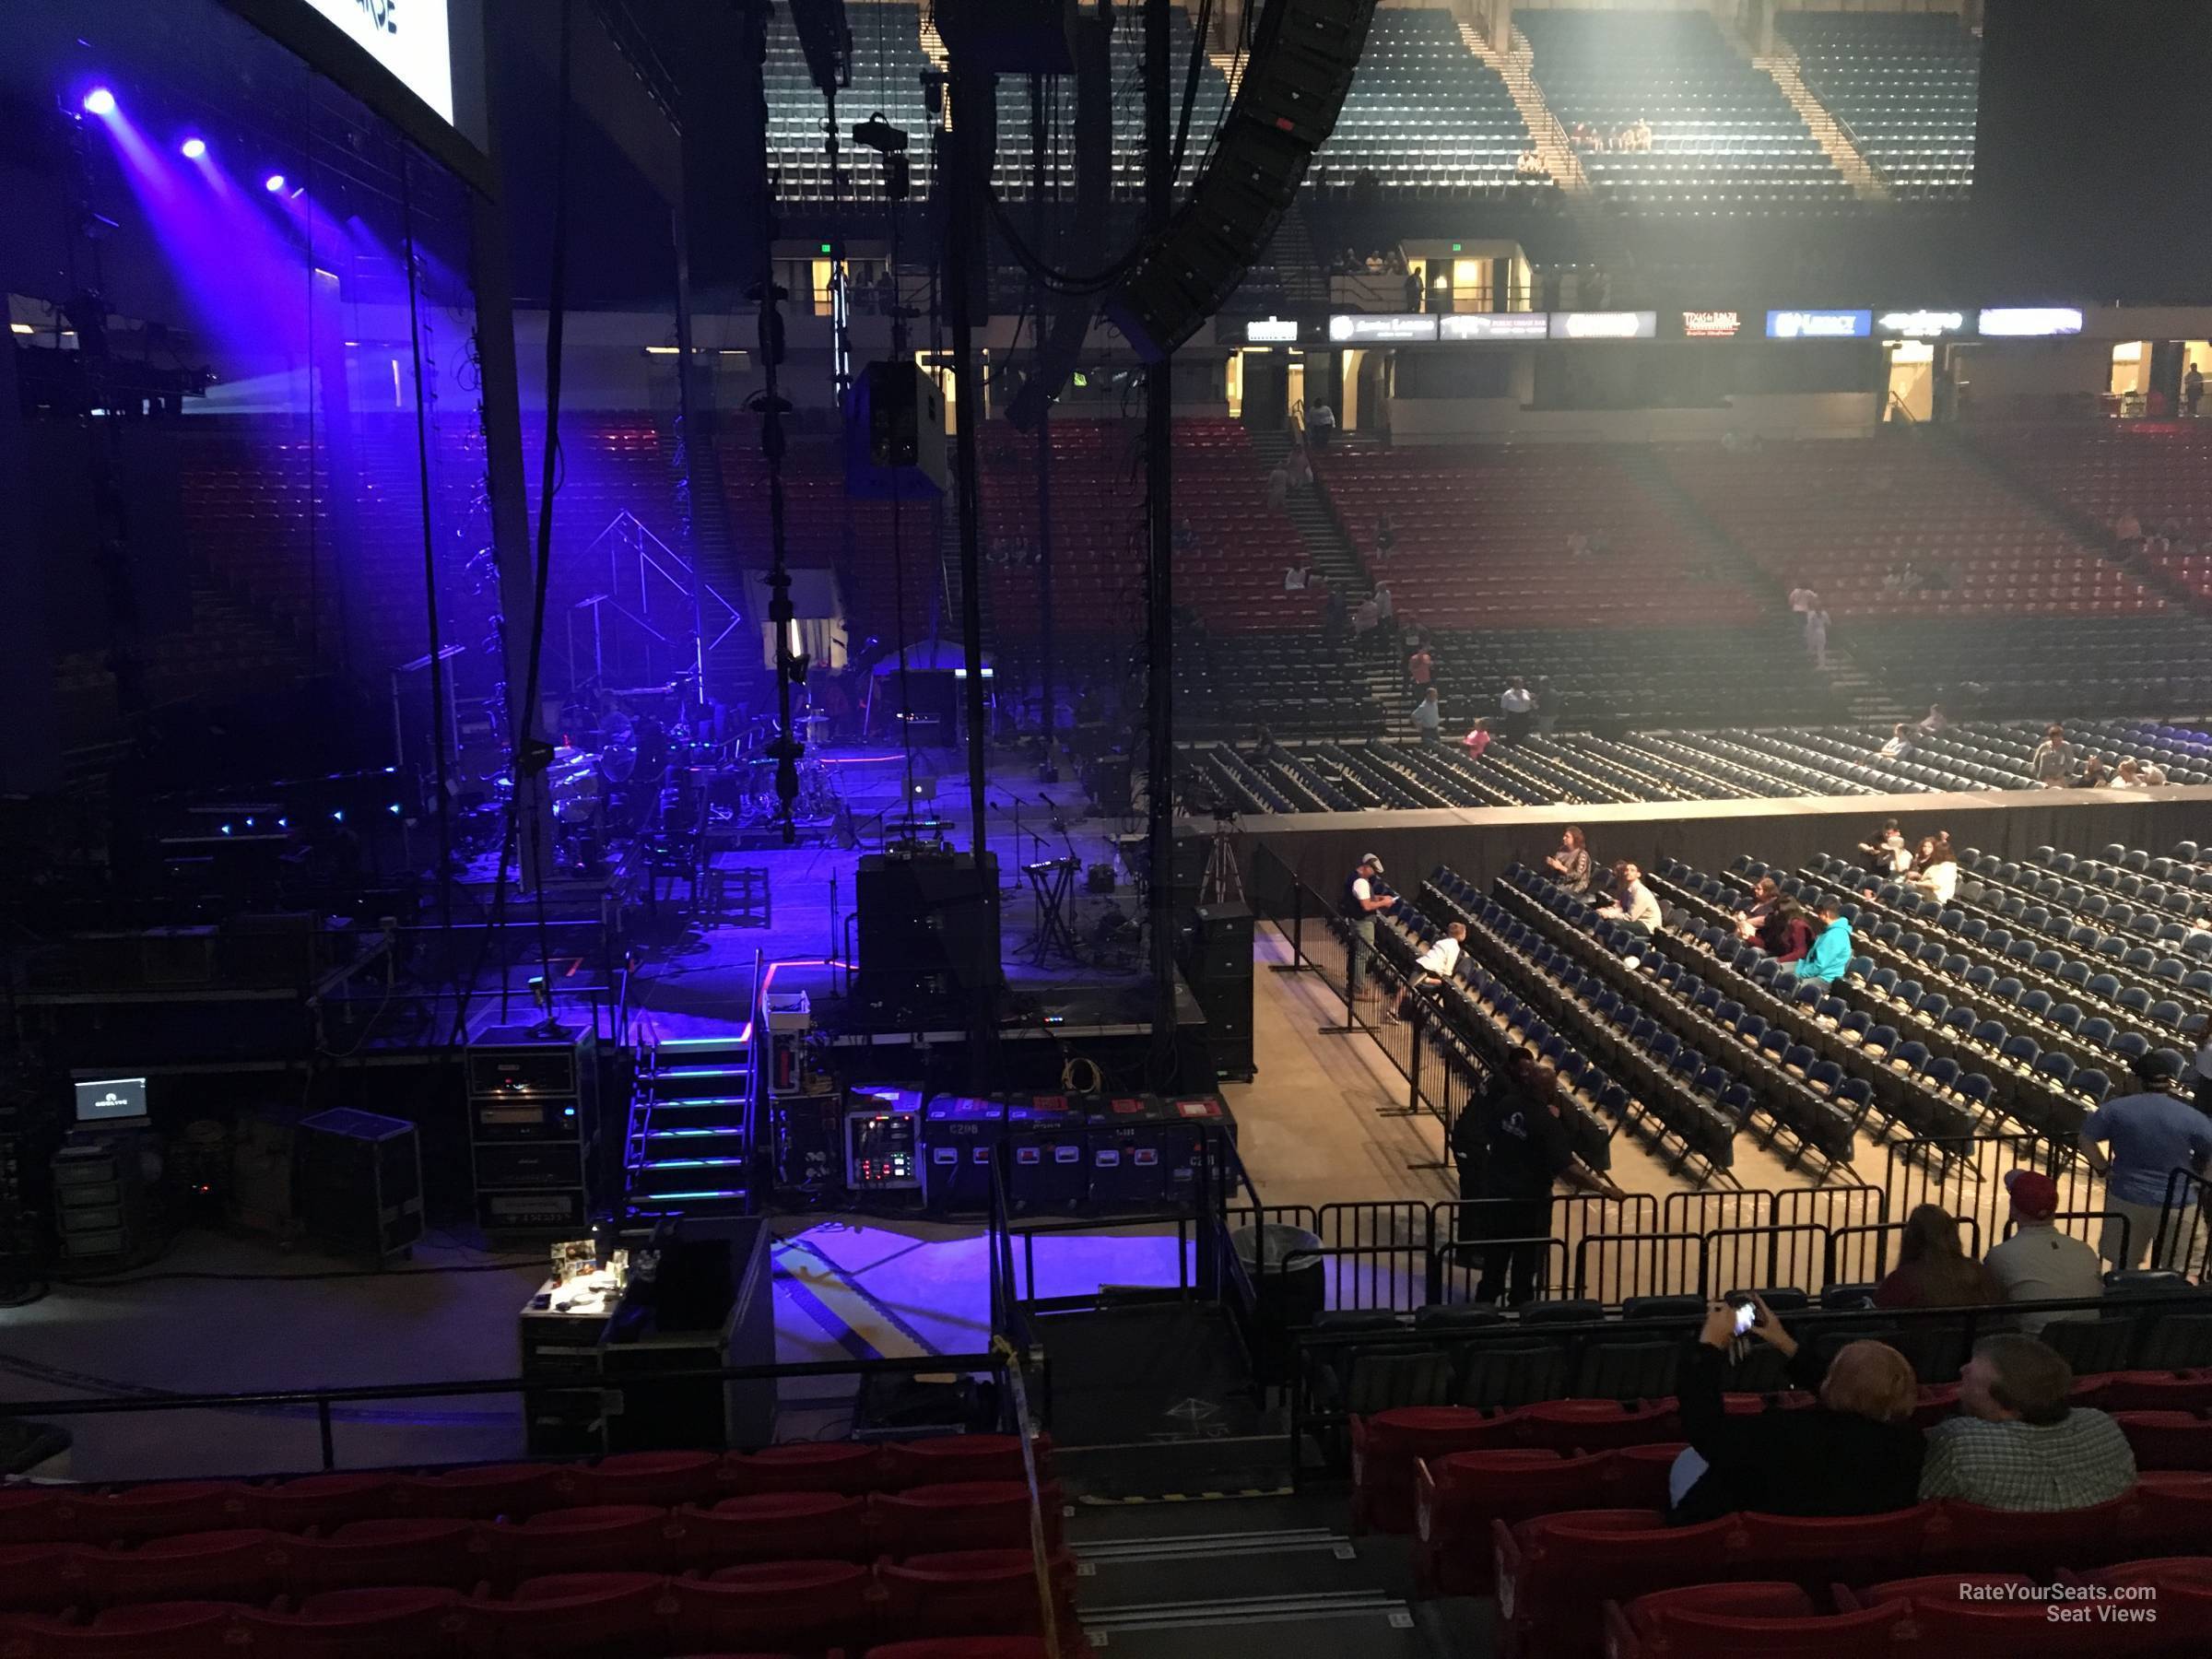 section 132, row p seat view  - legacy arena at the bjcc